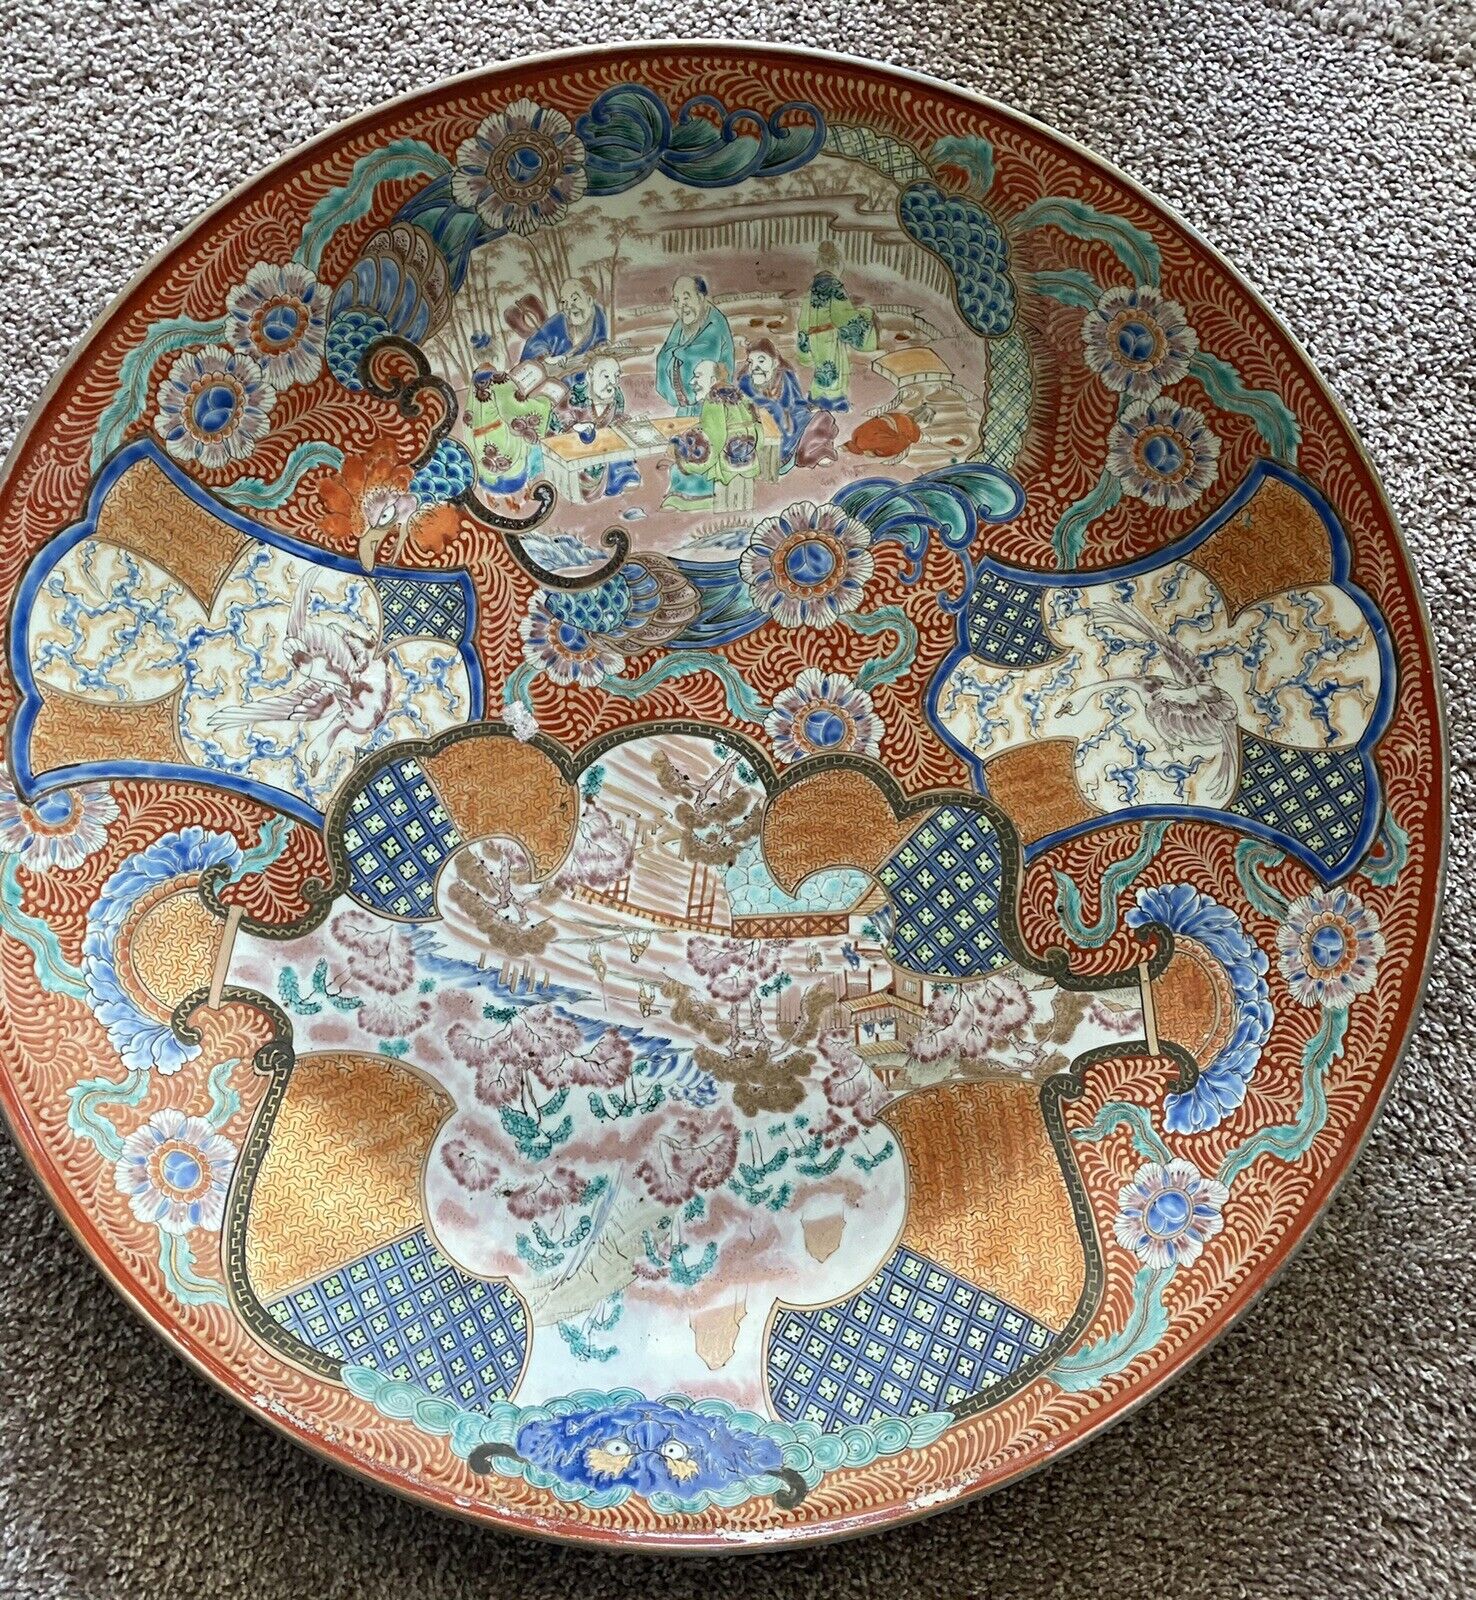 Antique Valuations: Japanese Imari Charger 24 1/2” diameter Late Meiji or Taisho Period